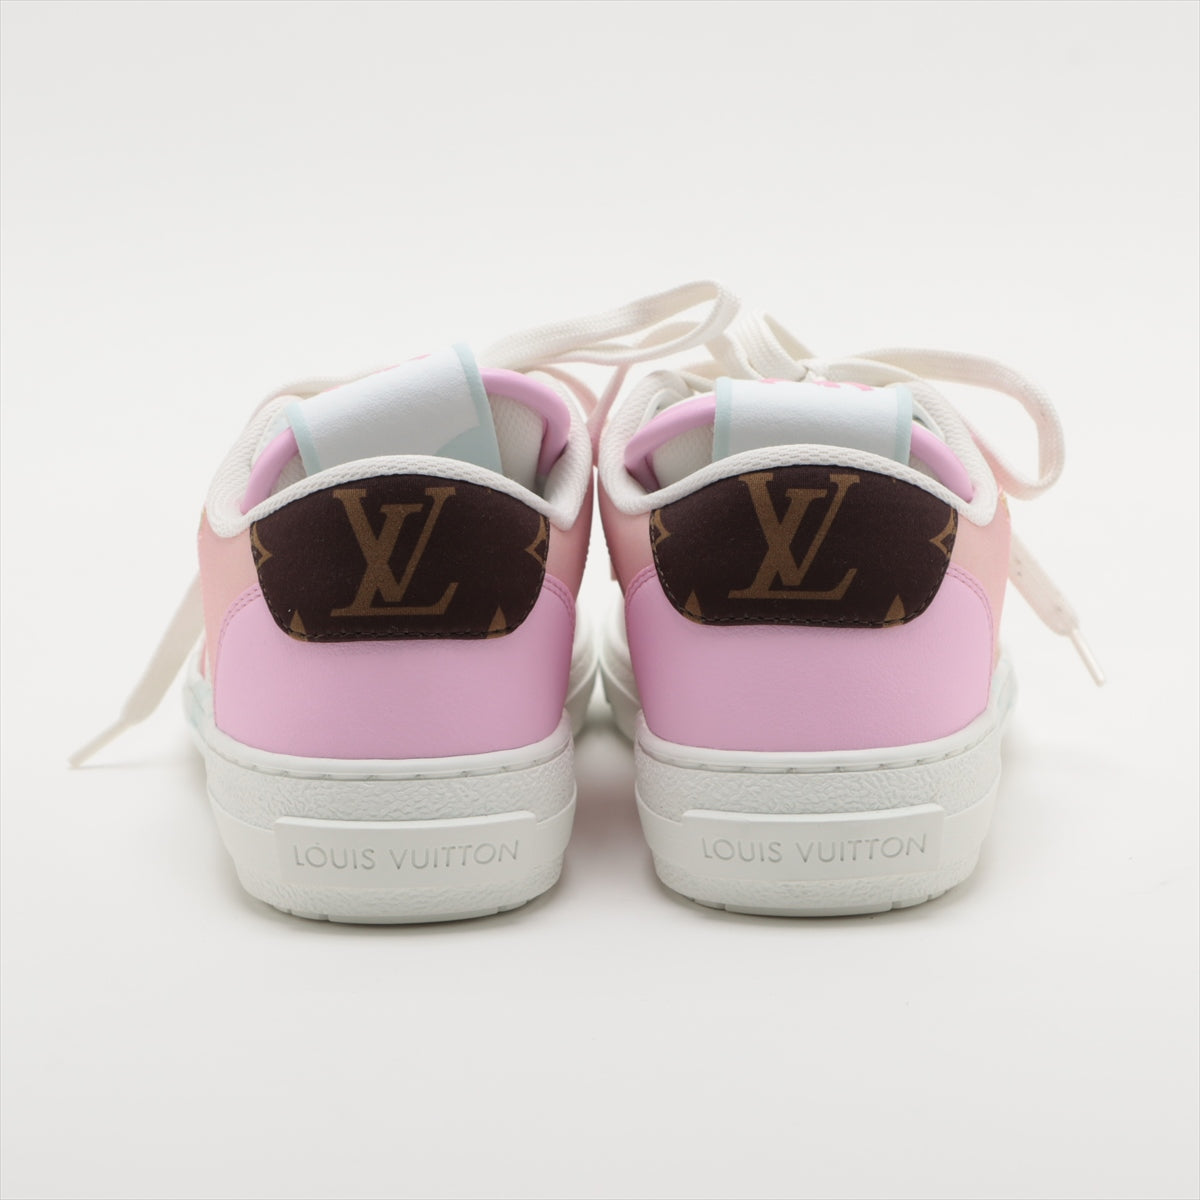 Louis Vuitton Charlie Line 22 years Leather x fabric Sneakers EU36 Ladies' White x pink LD0232 Monogram Is there a replacement string box There is a bag